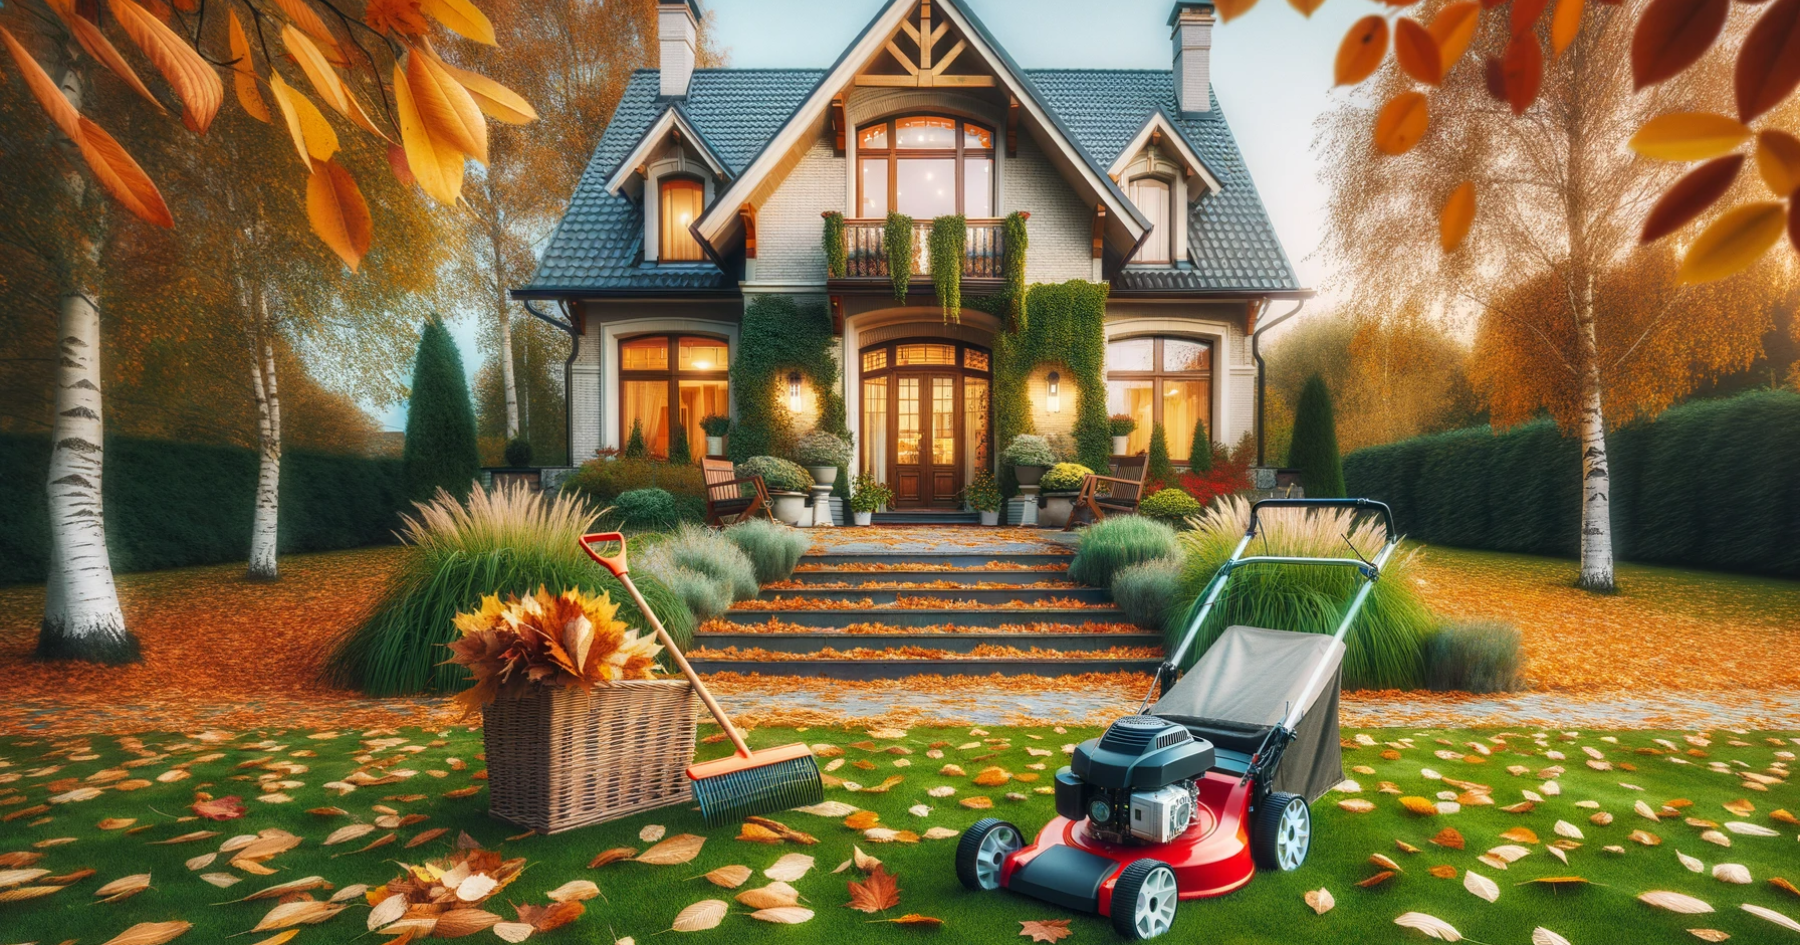 A lawn mower in front of a house with autumn leaves.